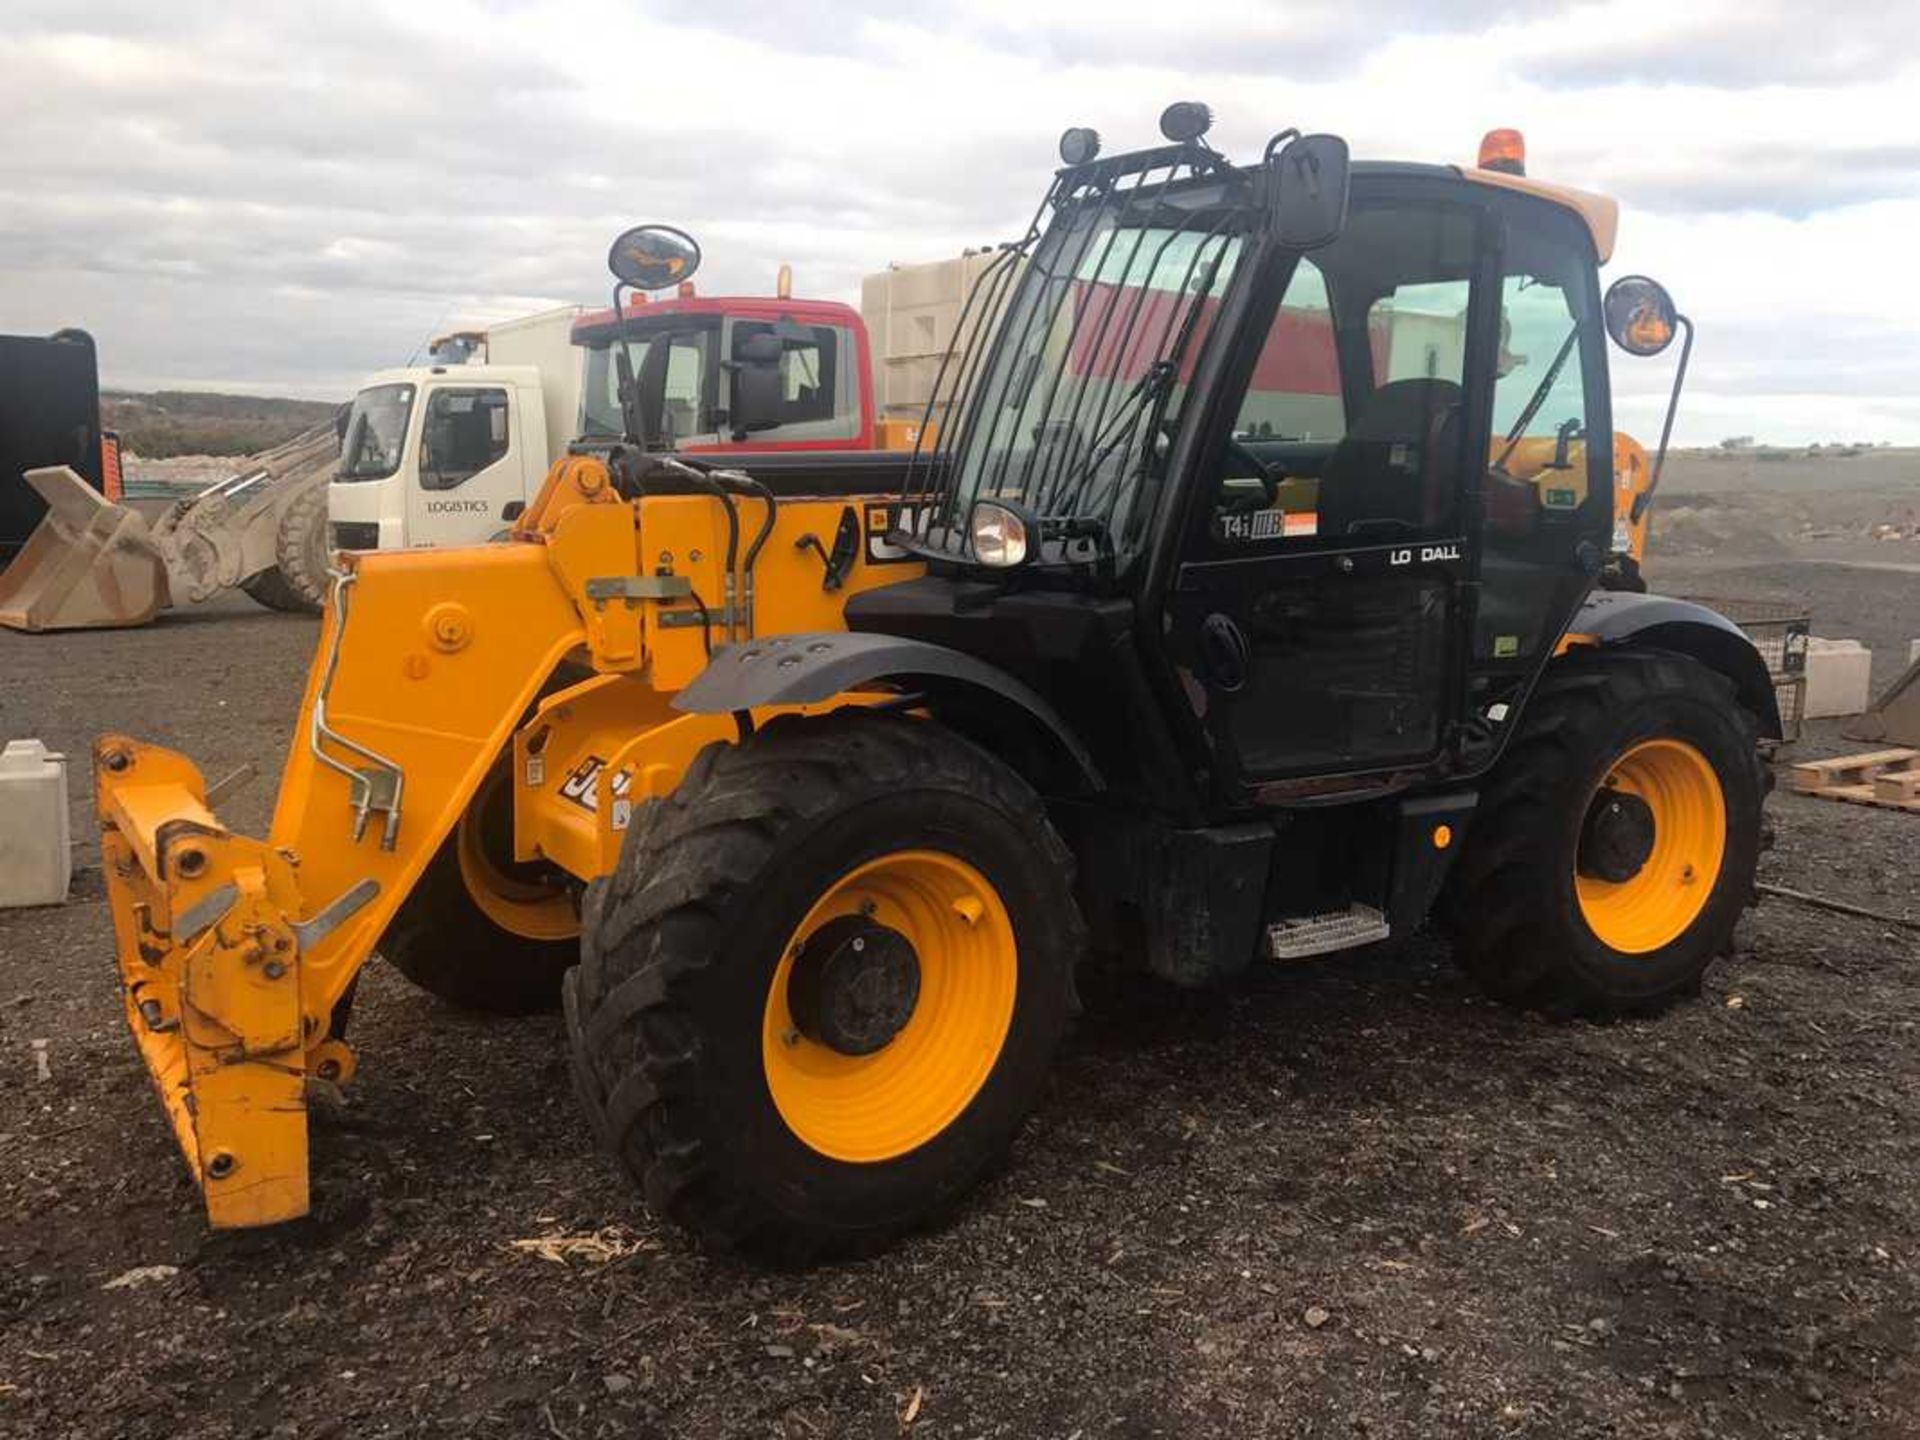 2013 JCB 535-95 TELESCOPIC FOLKLIFT LOW HOURS 771 HRS SOLD WITH NO BUCKETS OR FORKS REG MX13 MWF - Image 2 of 6